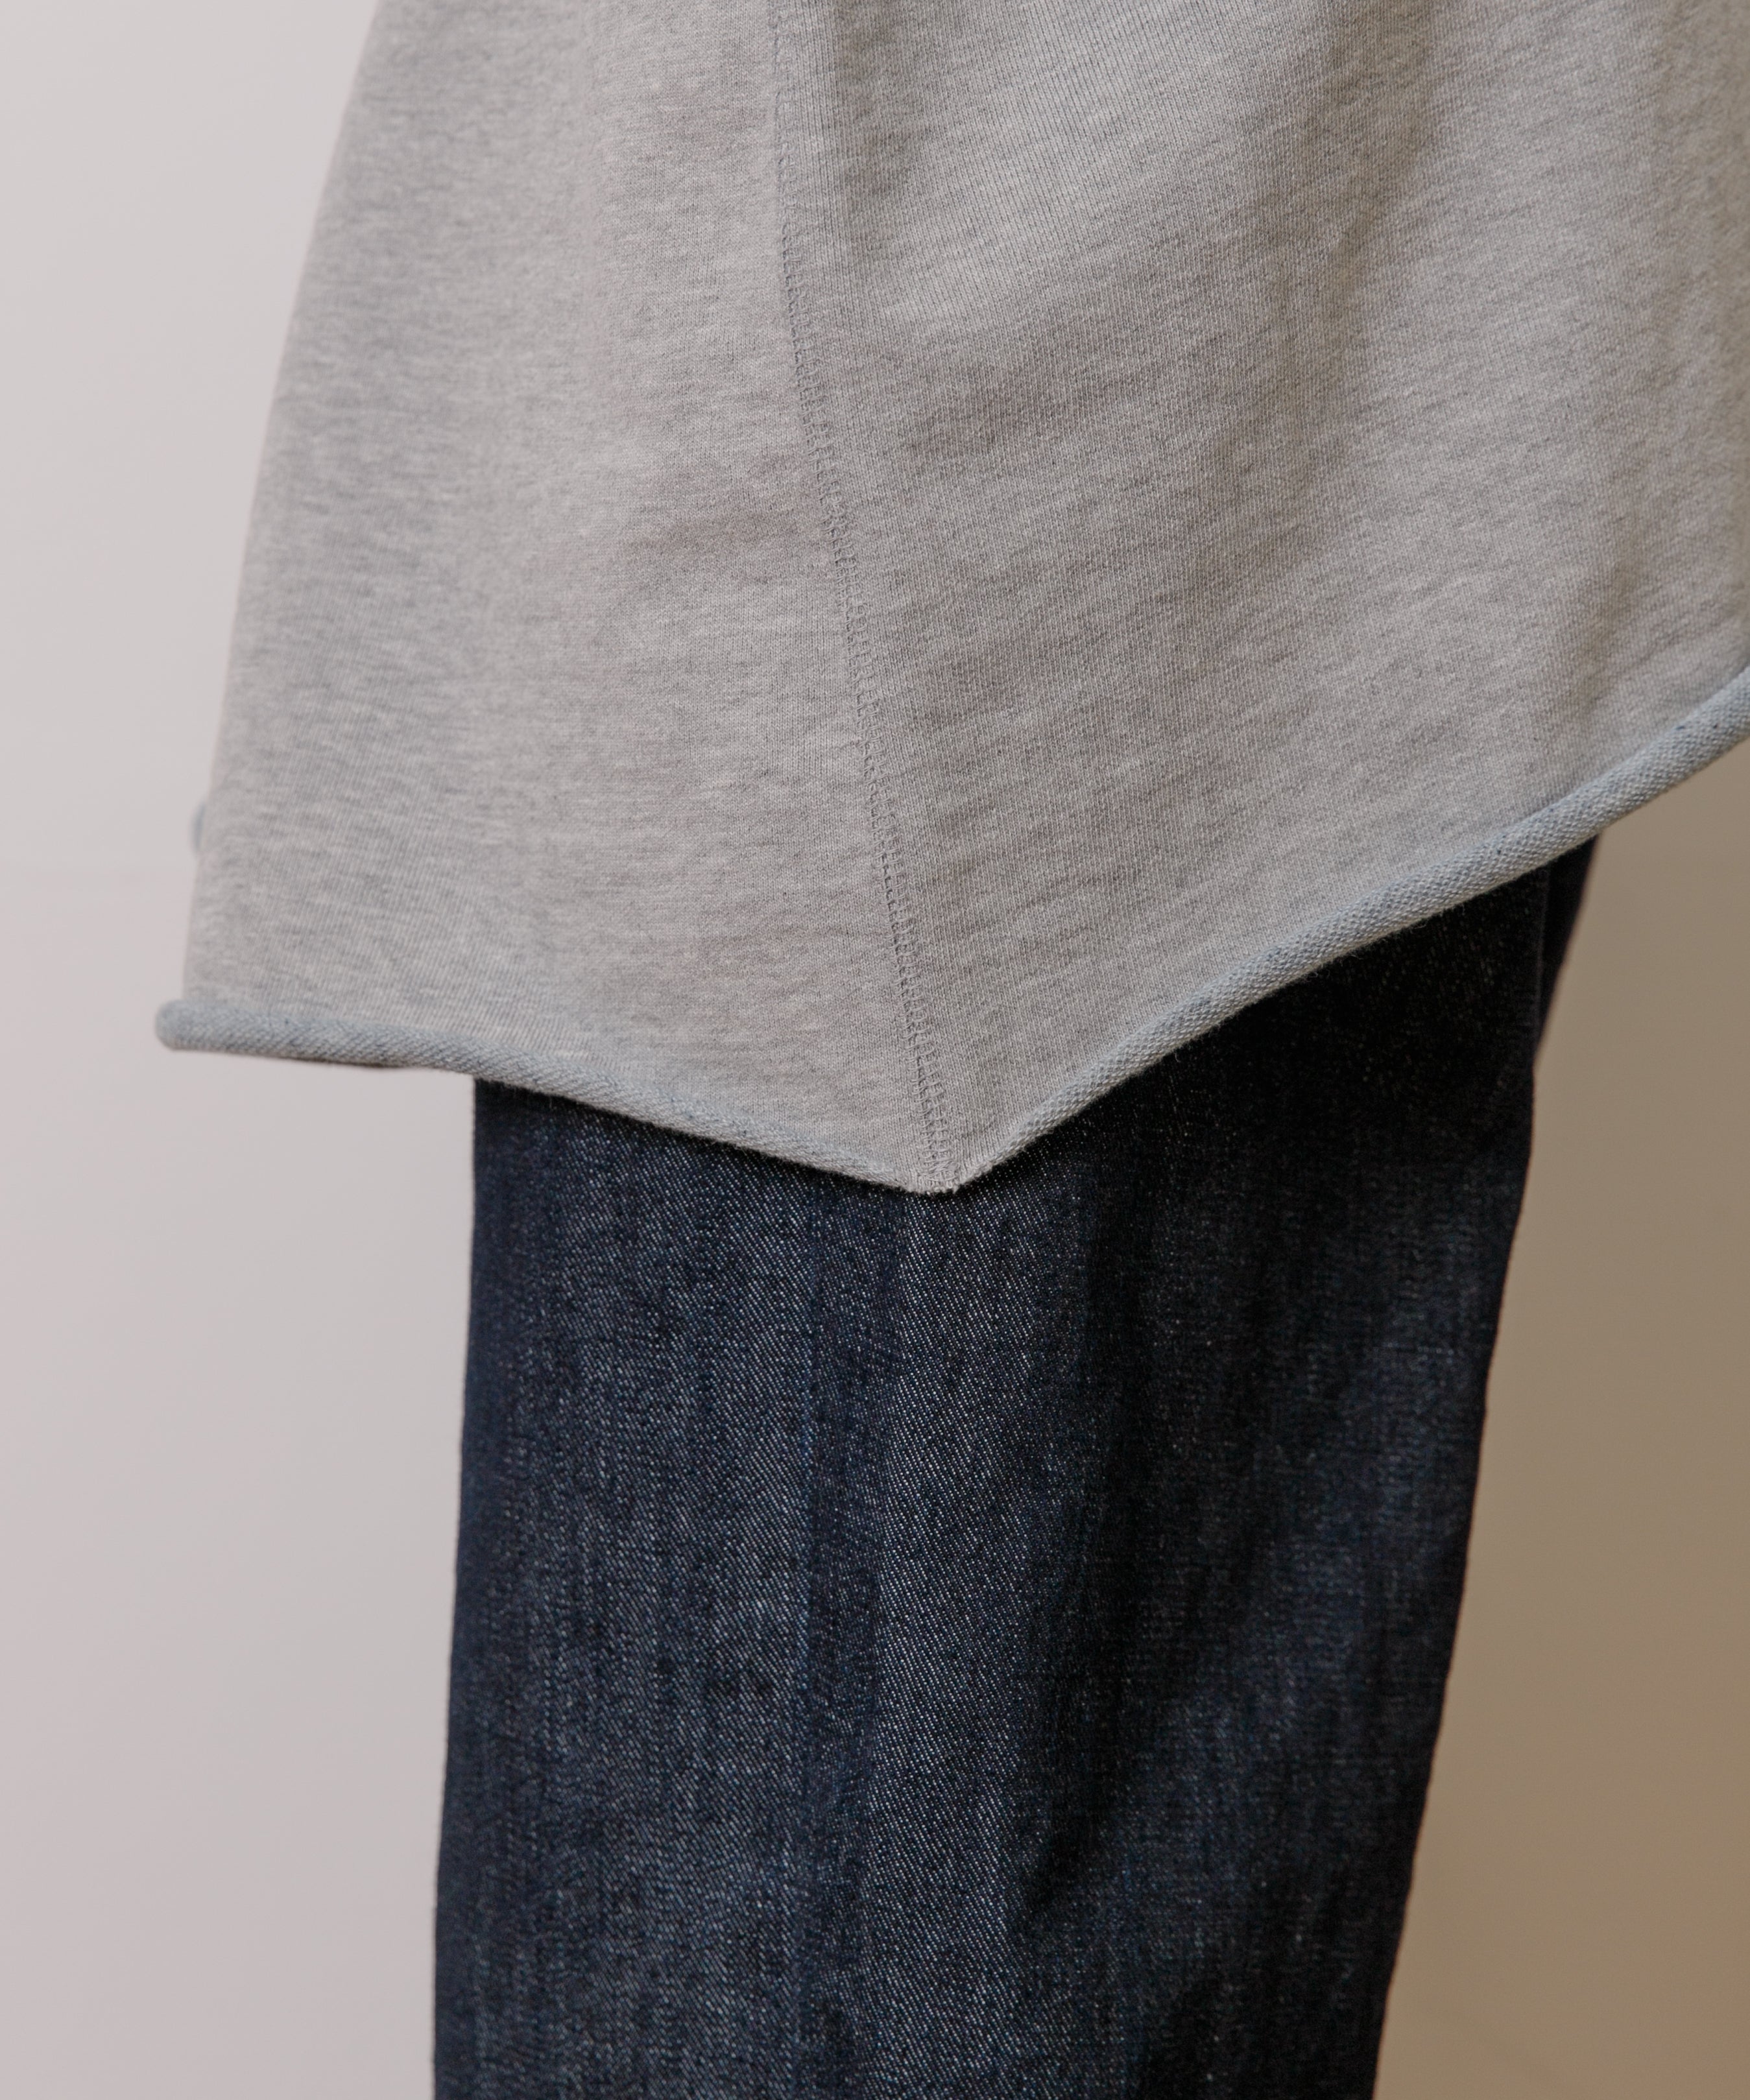 DAILY REVERSIBLE S/S SWEAT <br> THE GOODLAND MARKET コラボアイテム